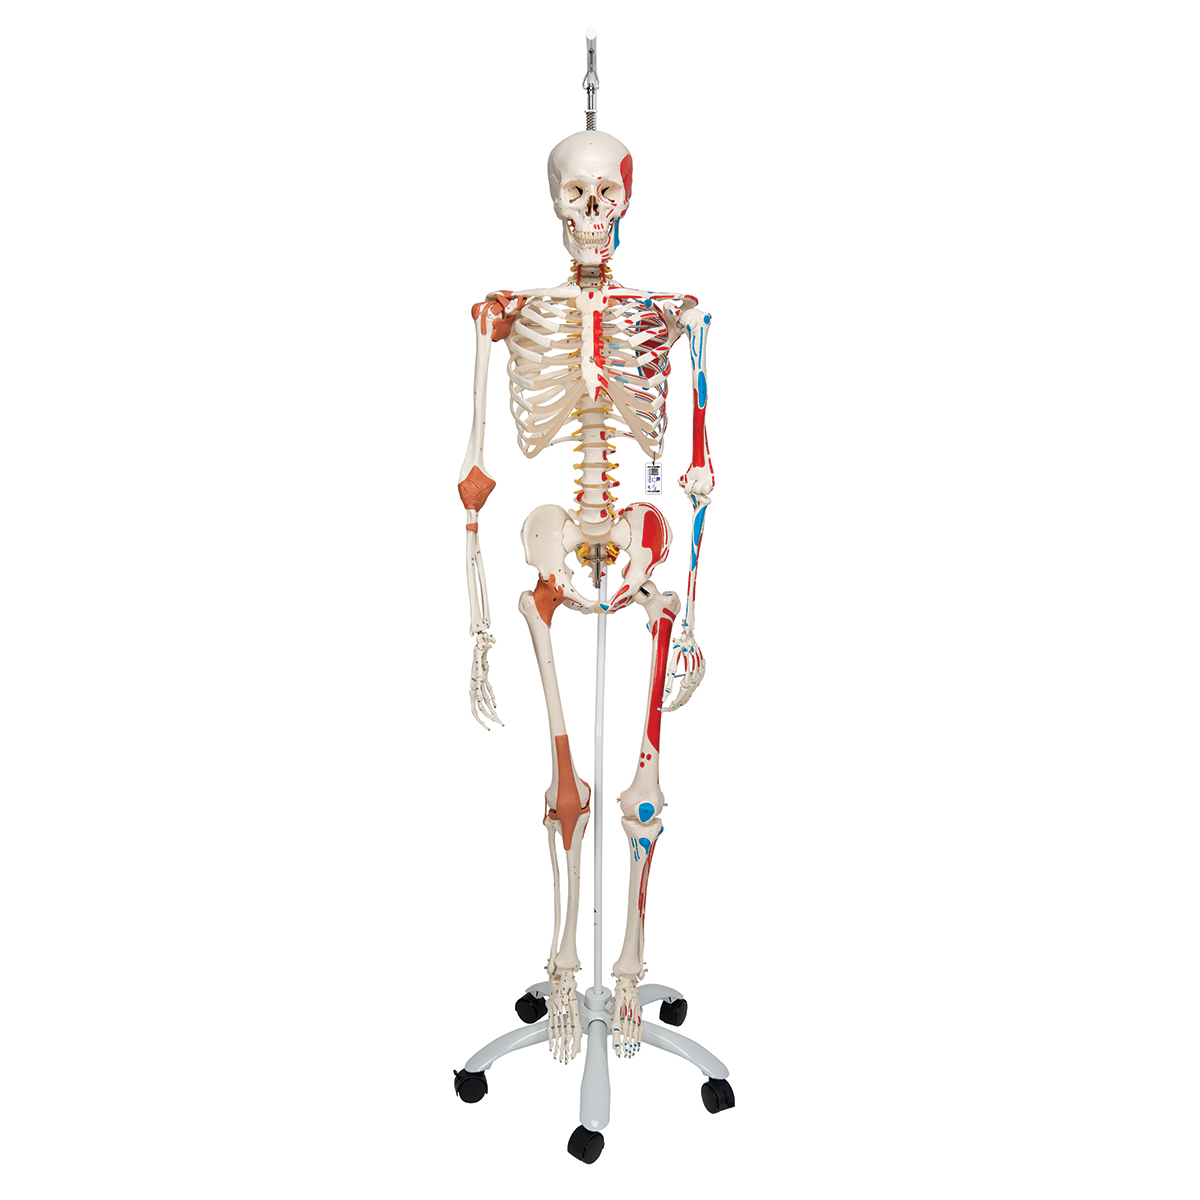 Human Skeleton Model Sam on Hanging Stand with Muscle Ligaments - 3B Smart Anatomy